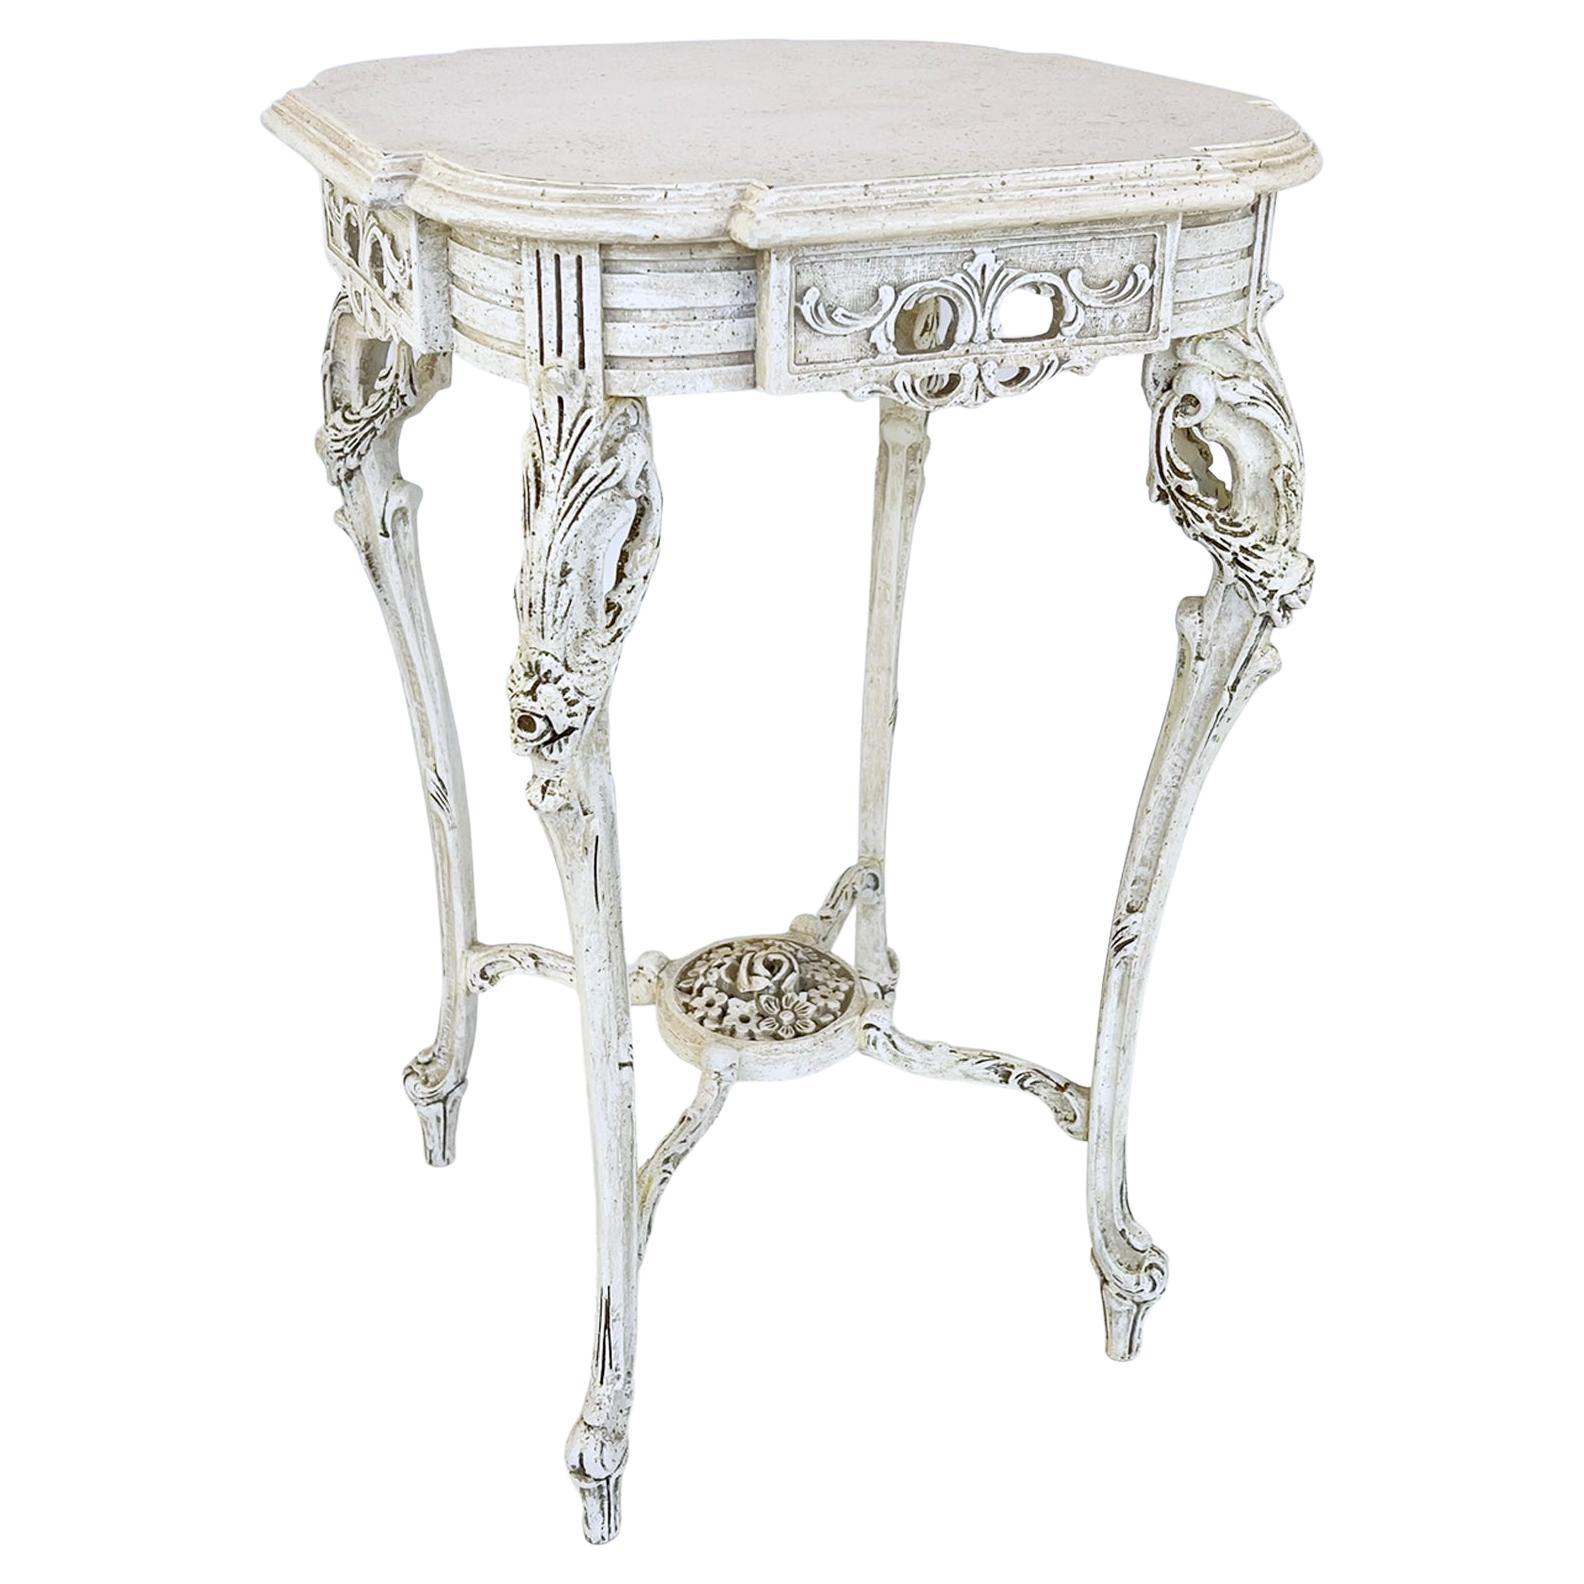 Heavily Carved and Painted Vintage Occasional Table